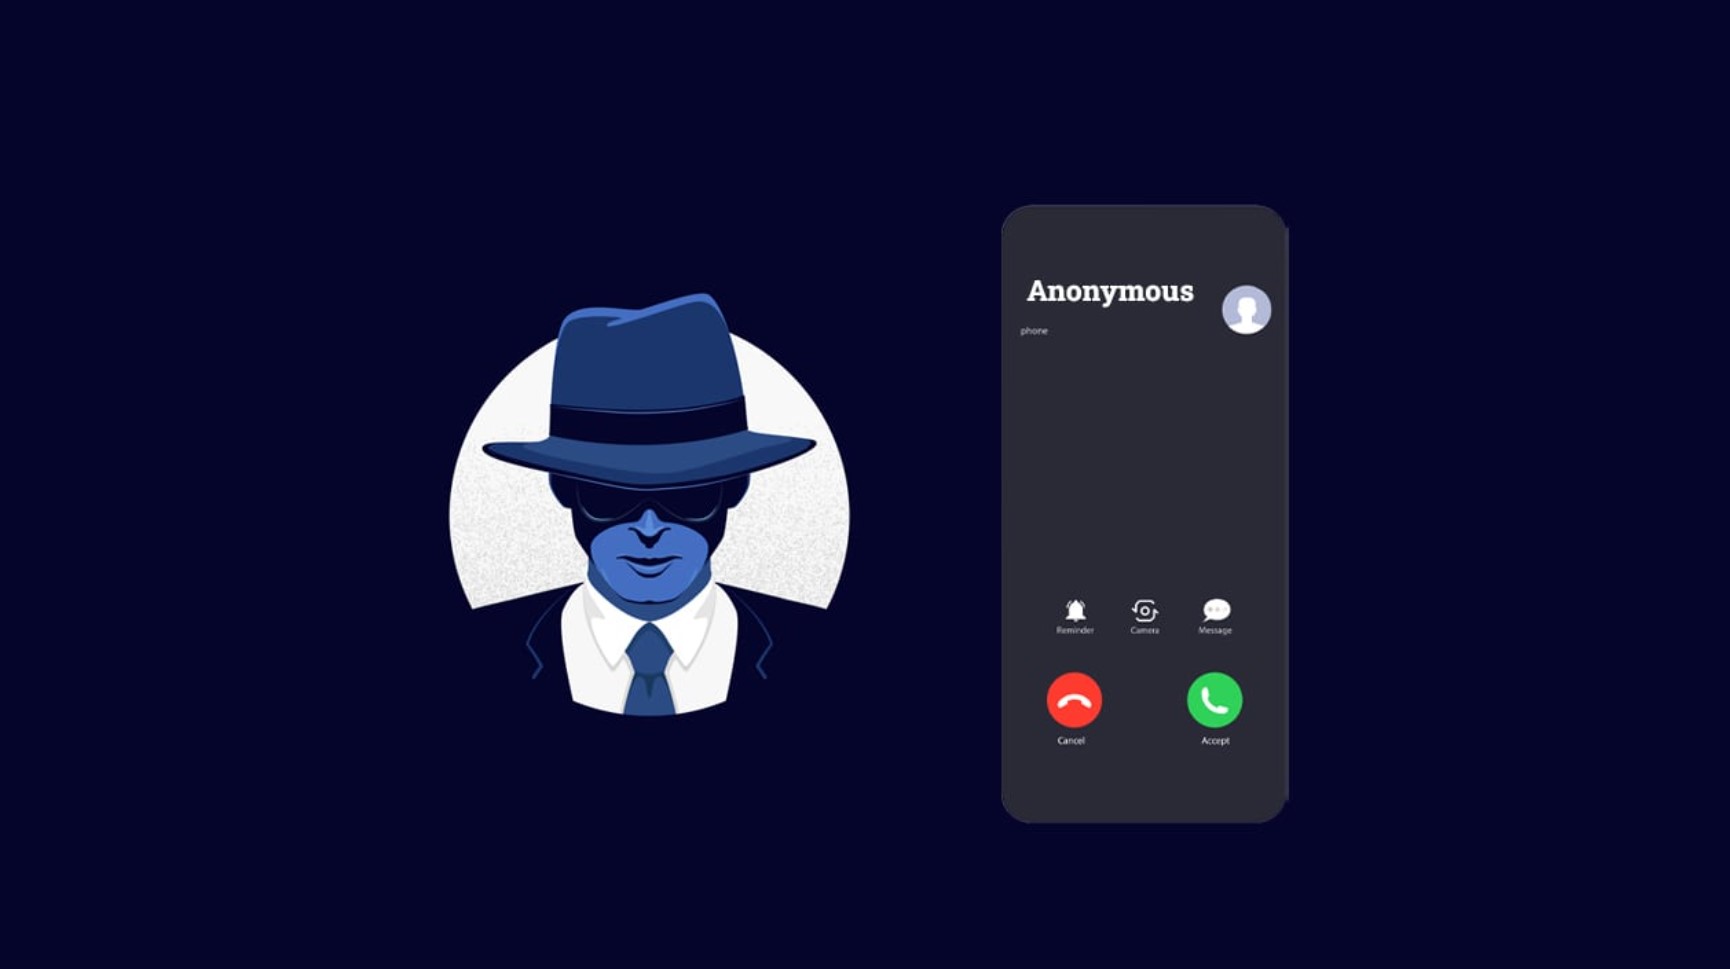 How to Make An Anonymous Phone Call?